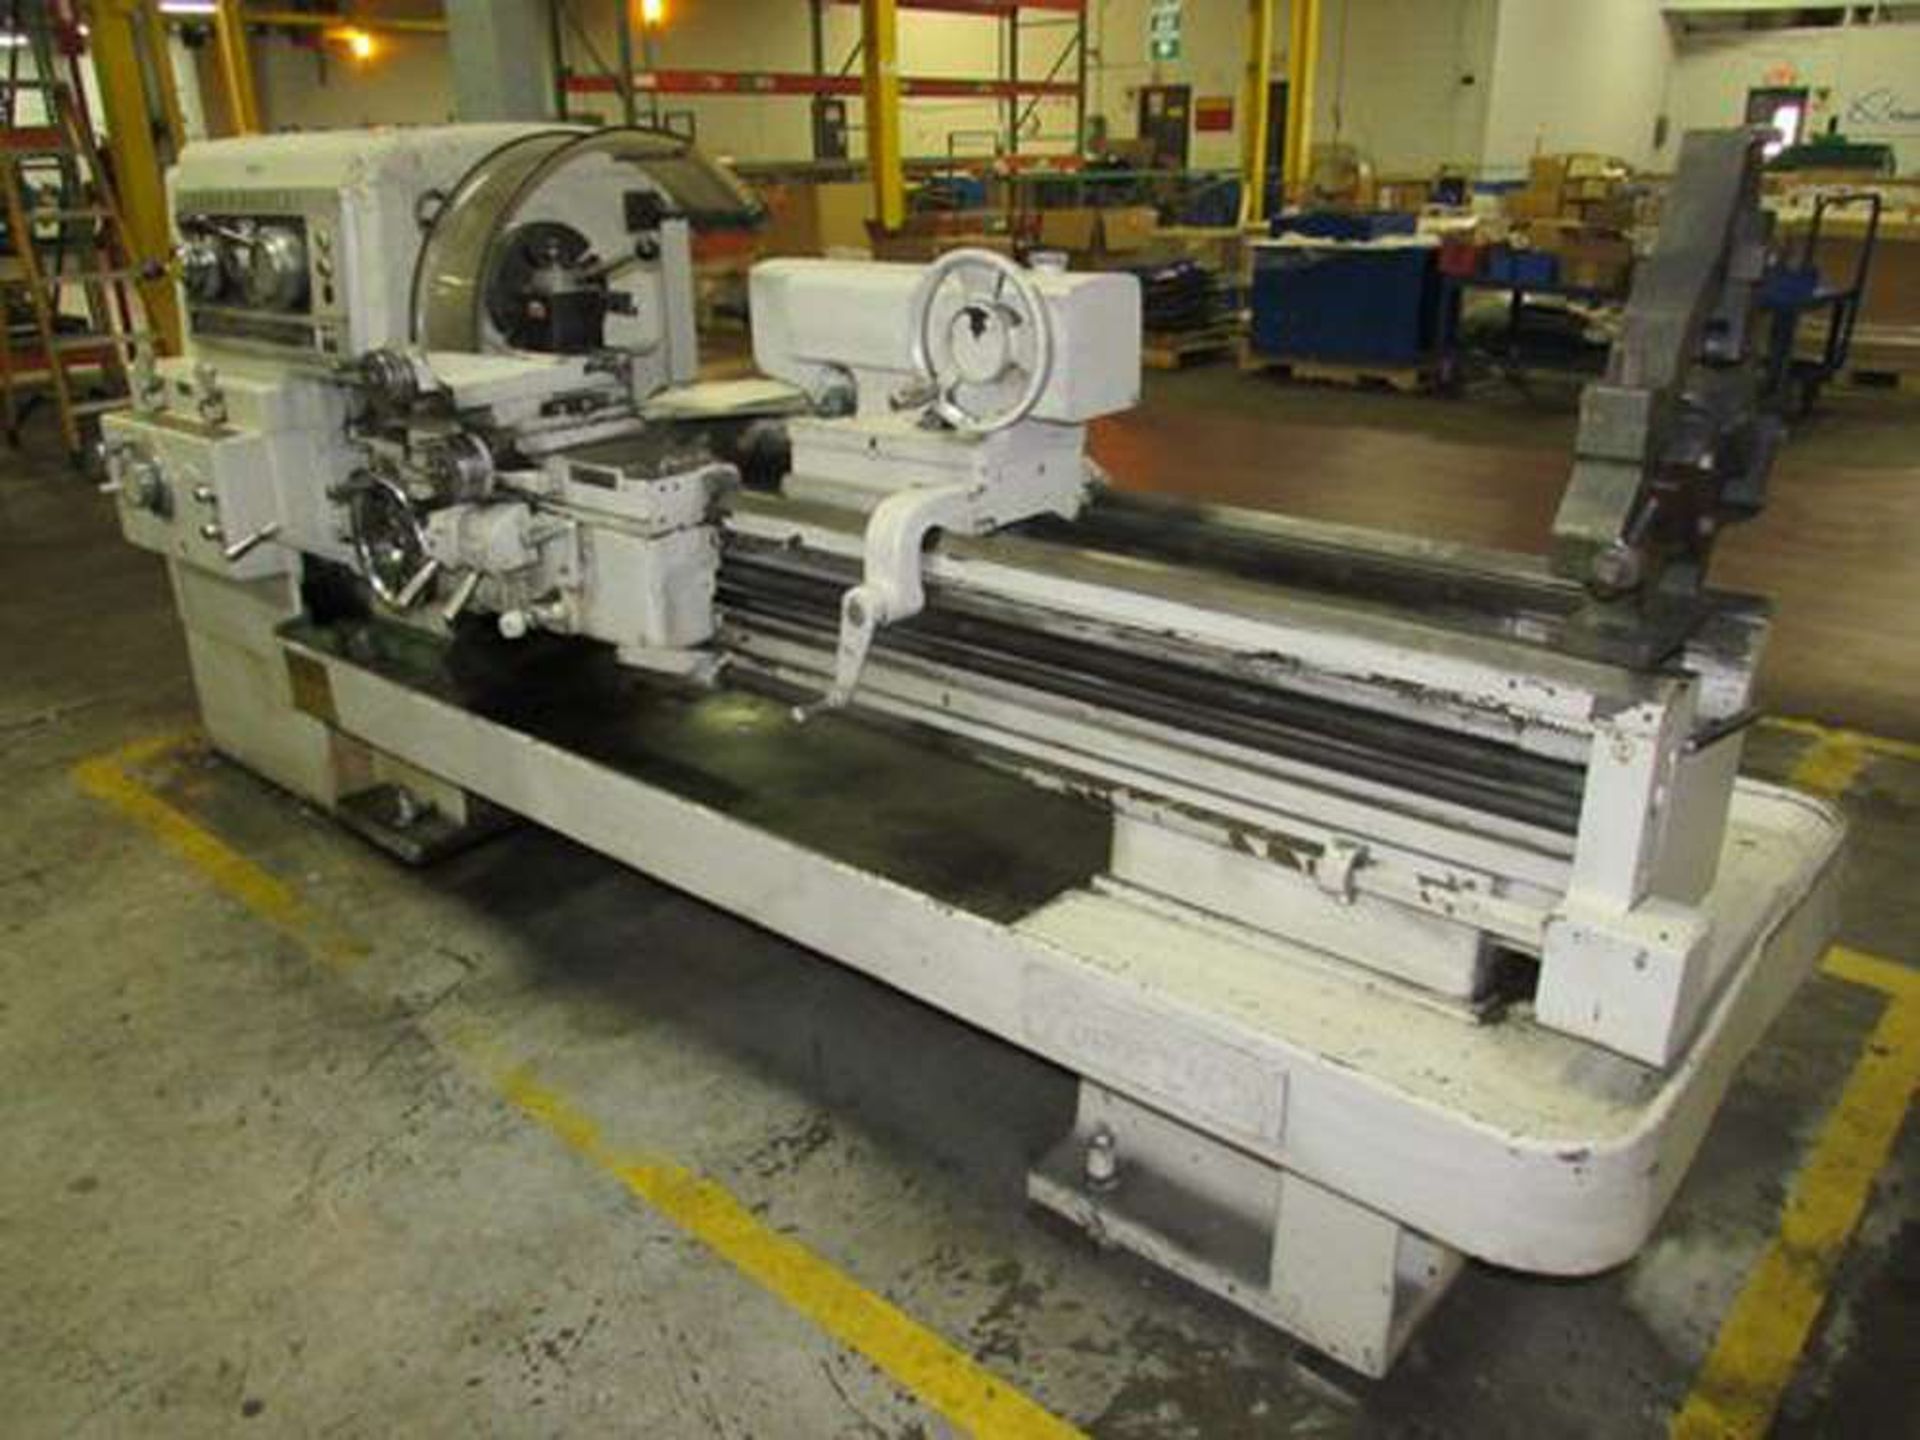 20" x 54" Lodge & Shipley Model 2013 Engine Lathe, S/N 49759, 3 Jaw Chuck, Steady Rest, Tool Post, - Image 2 of 5